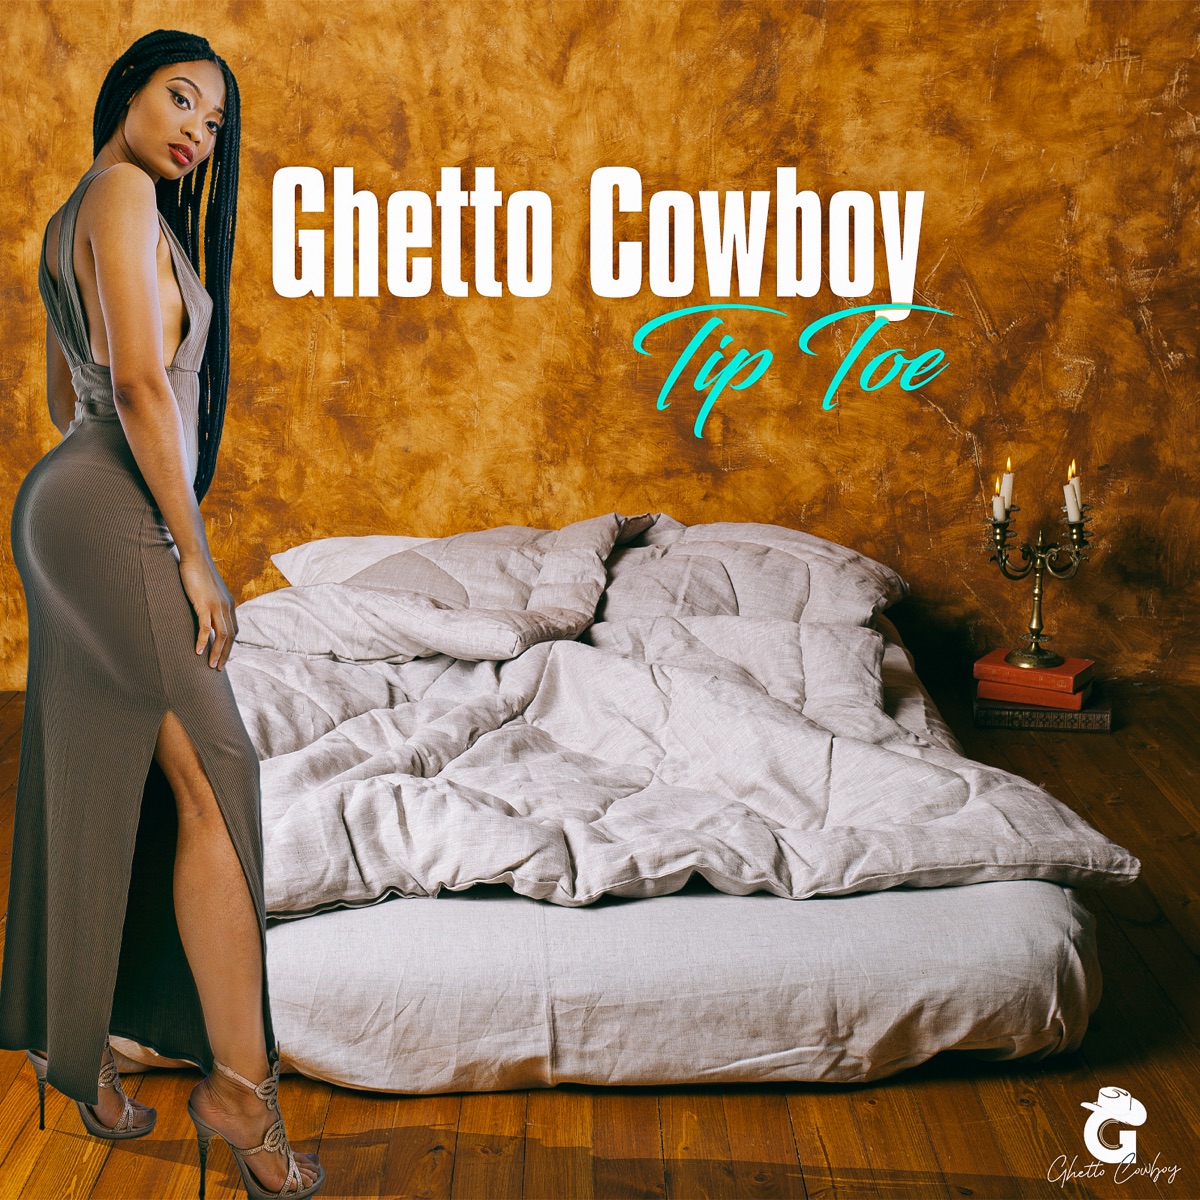 Make Me Wanna Pop a Pill (feat. Bigg Robb) - Single by Ghetto Cowboy on  Apple Music